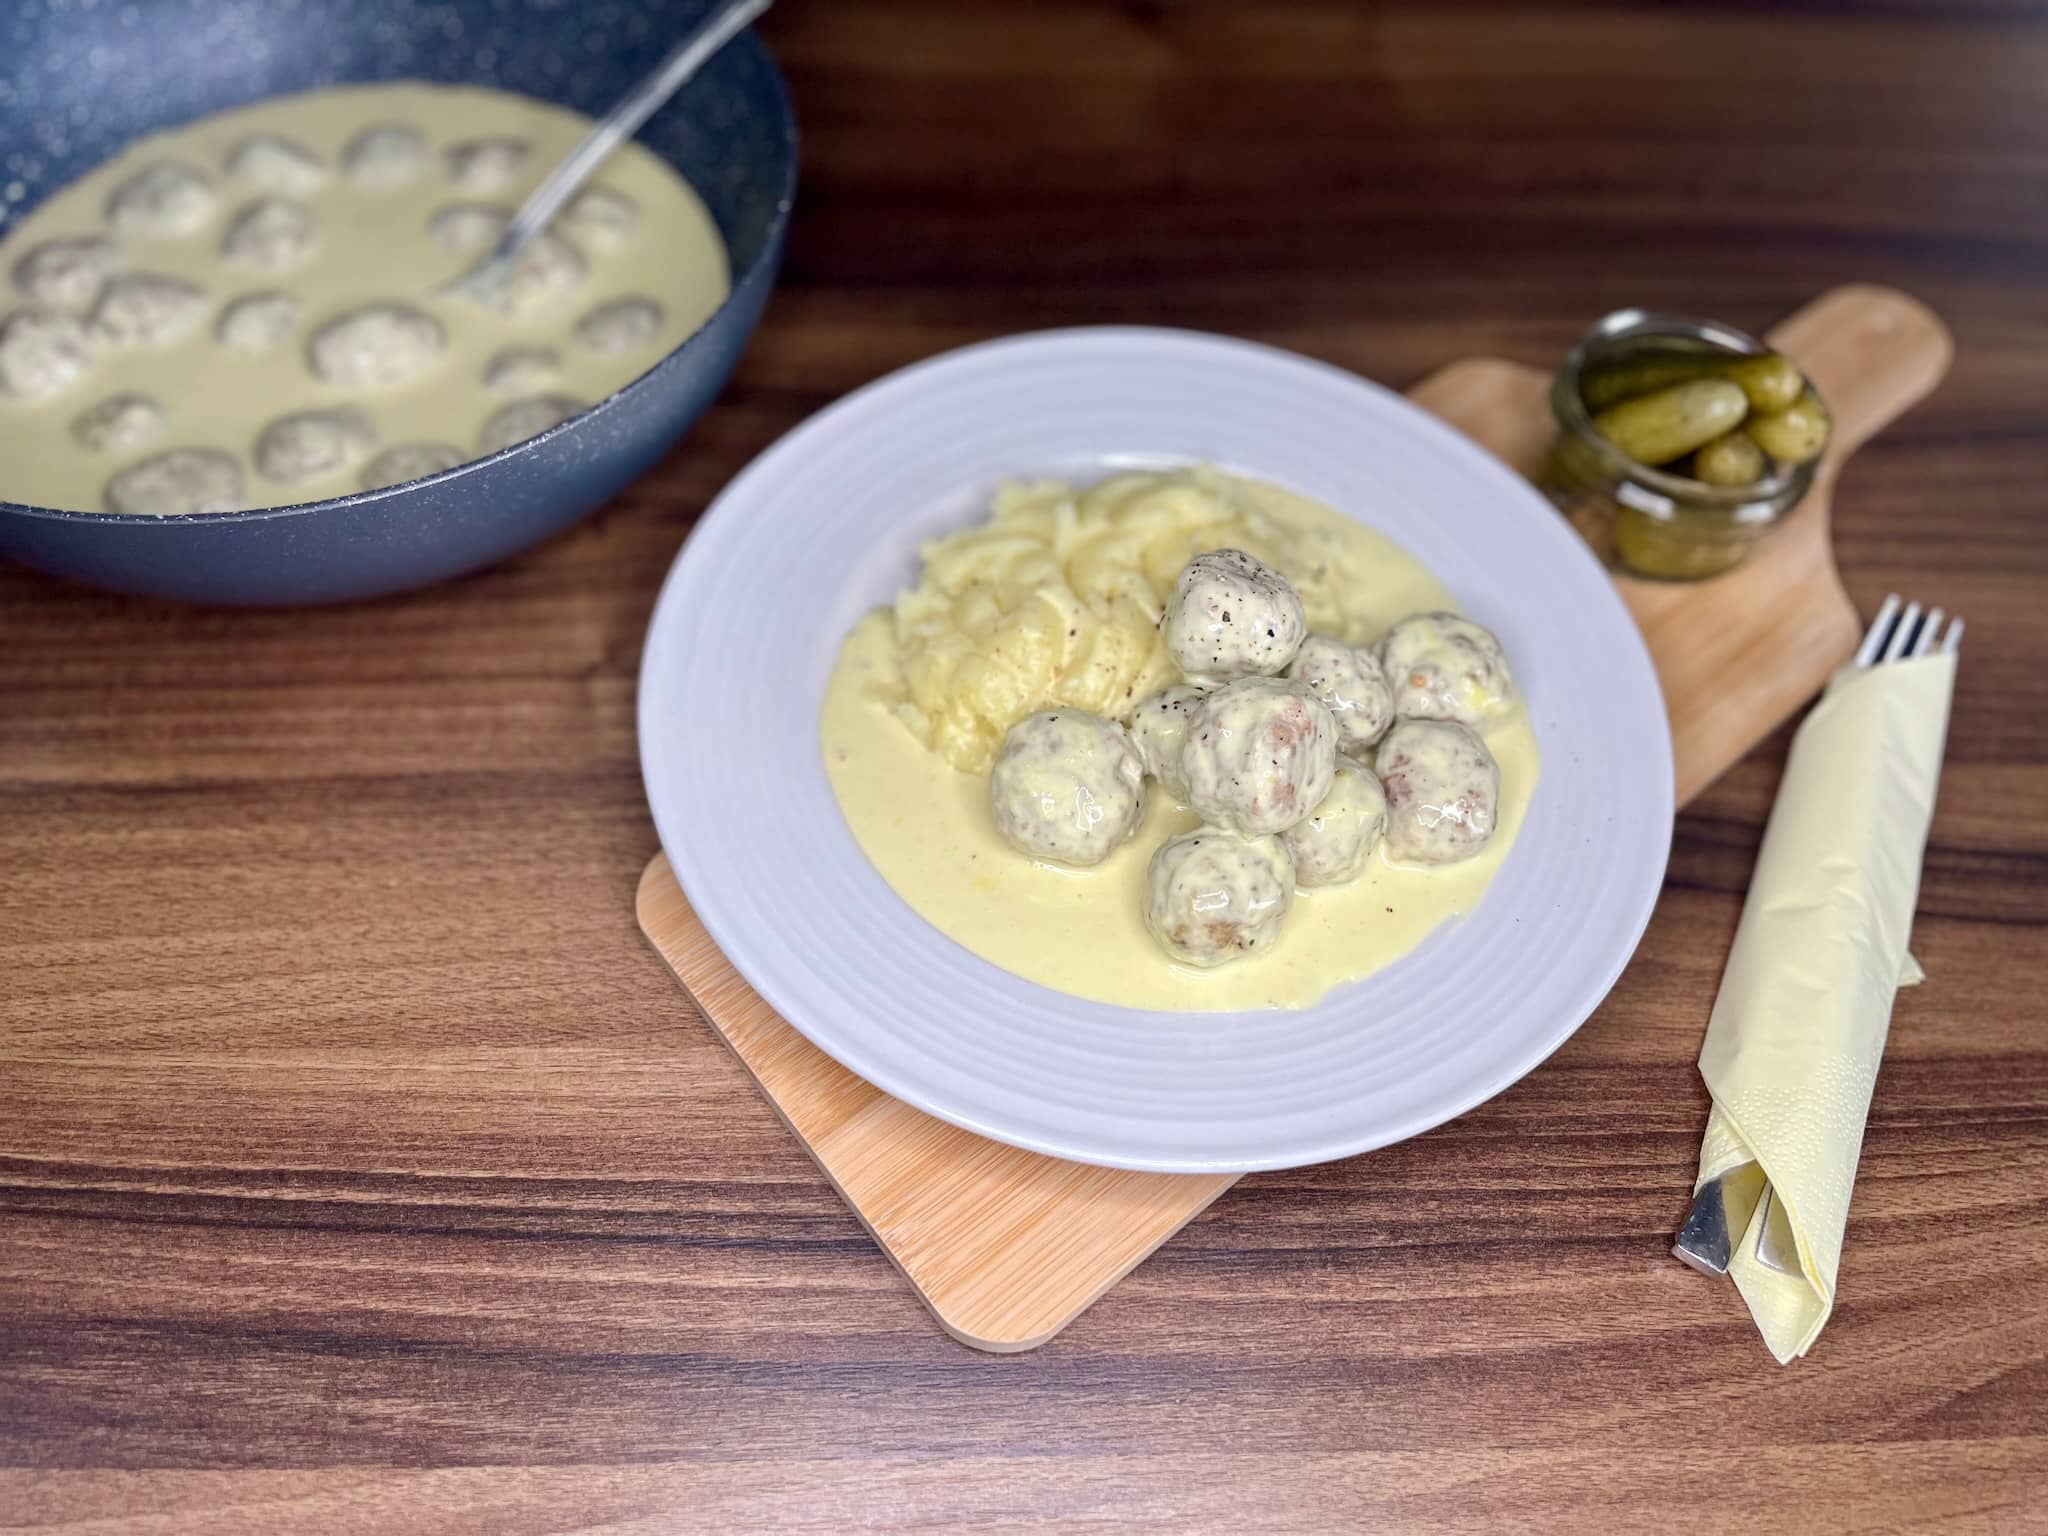 A portion of meatballs in creamy sauce served with mashed potatoes